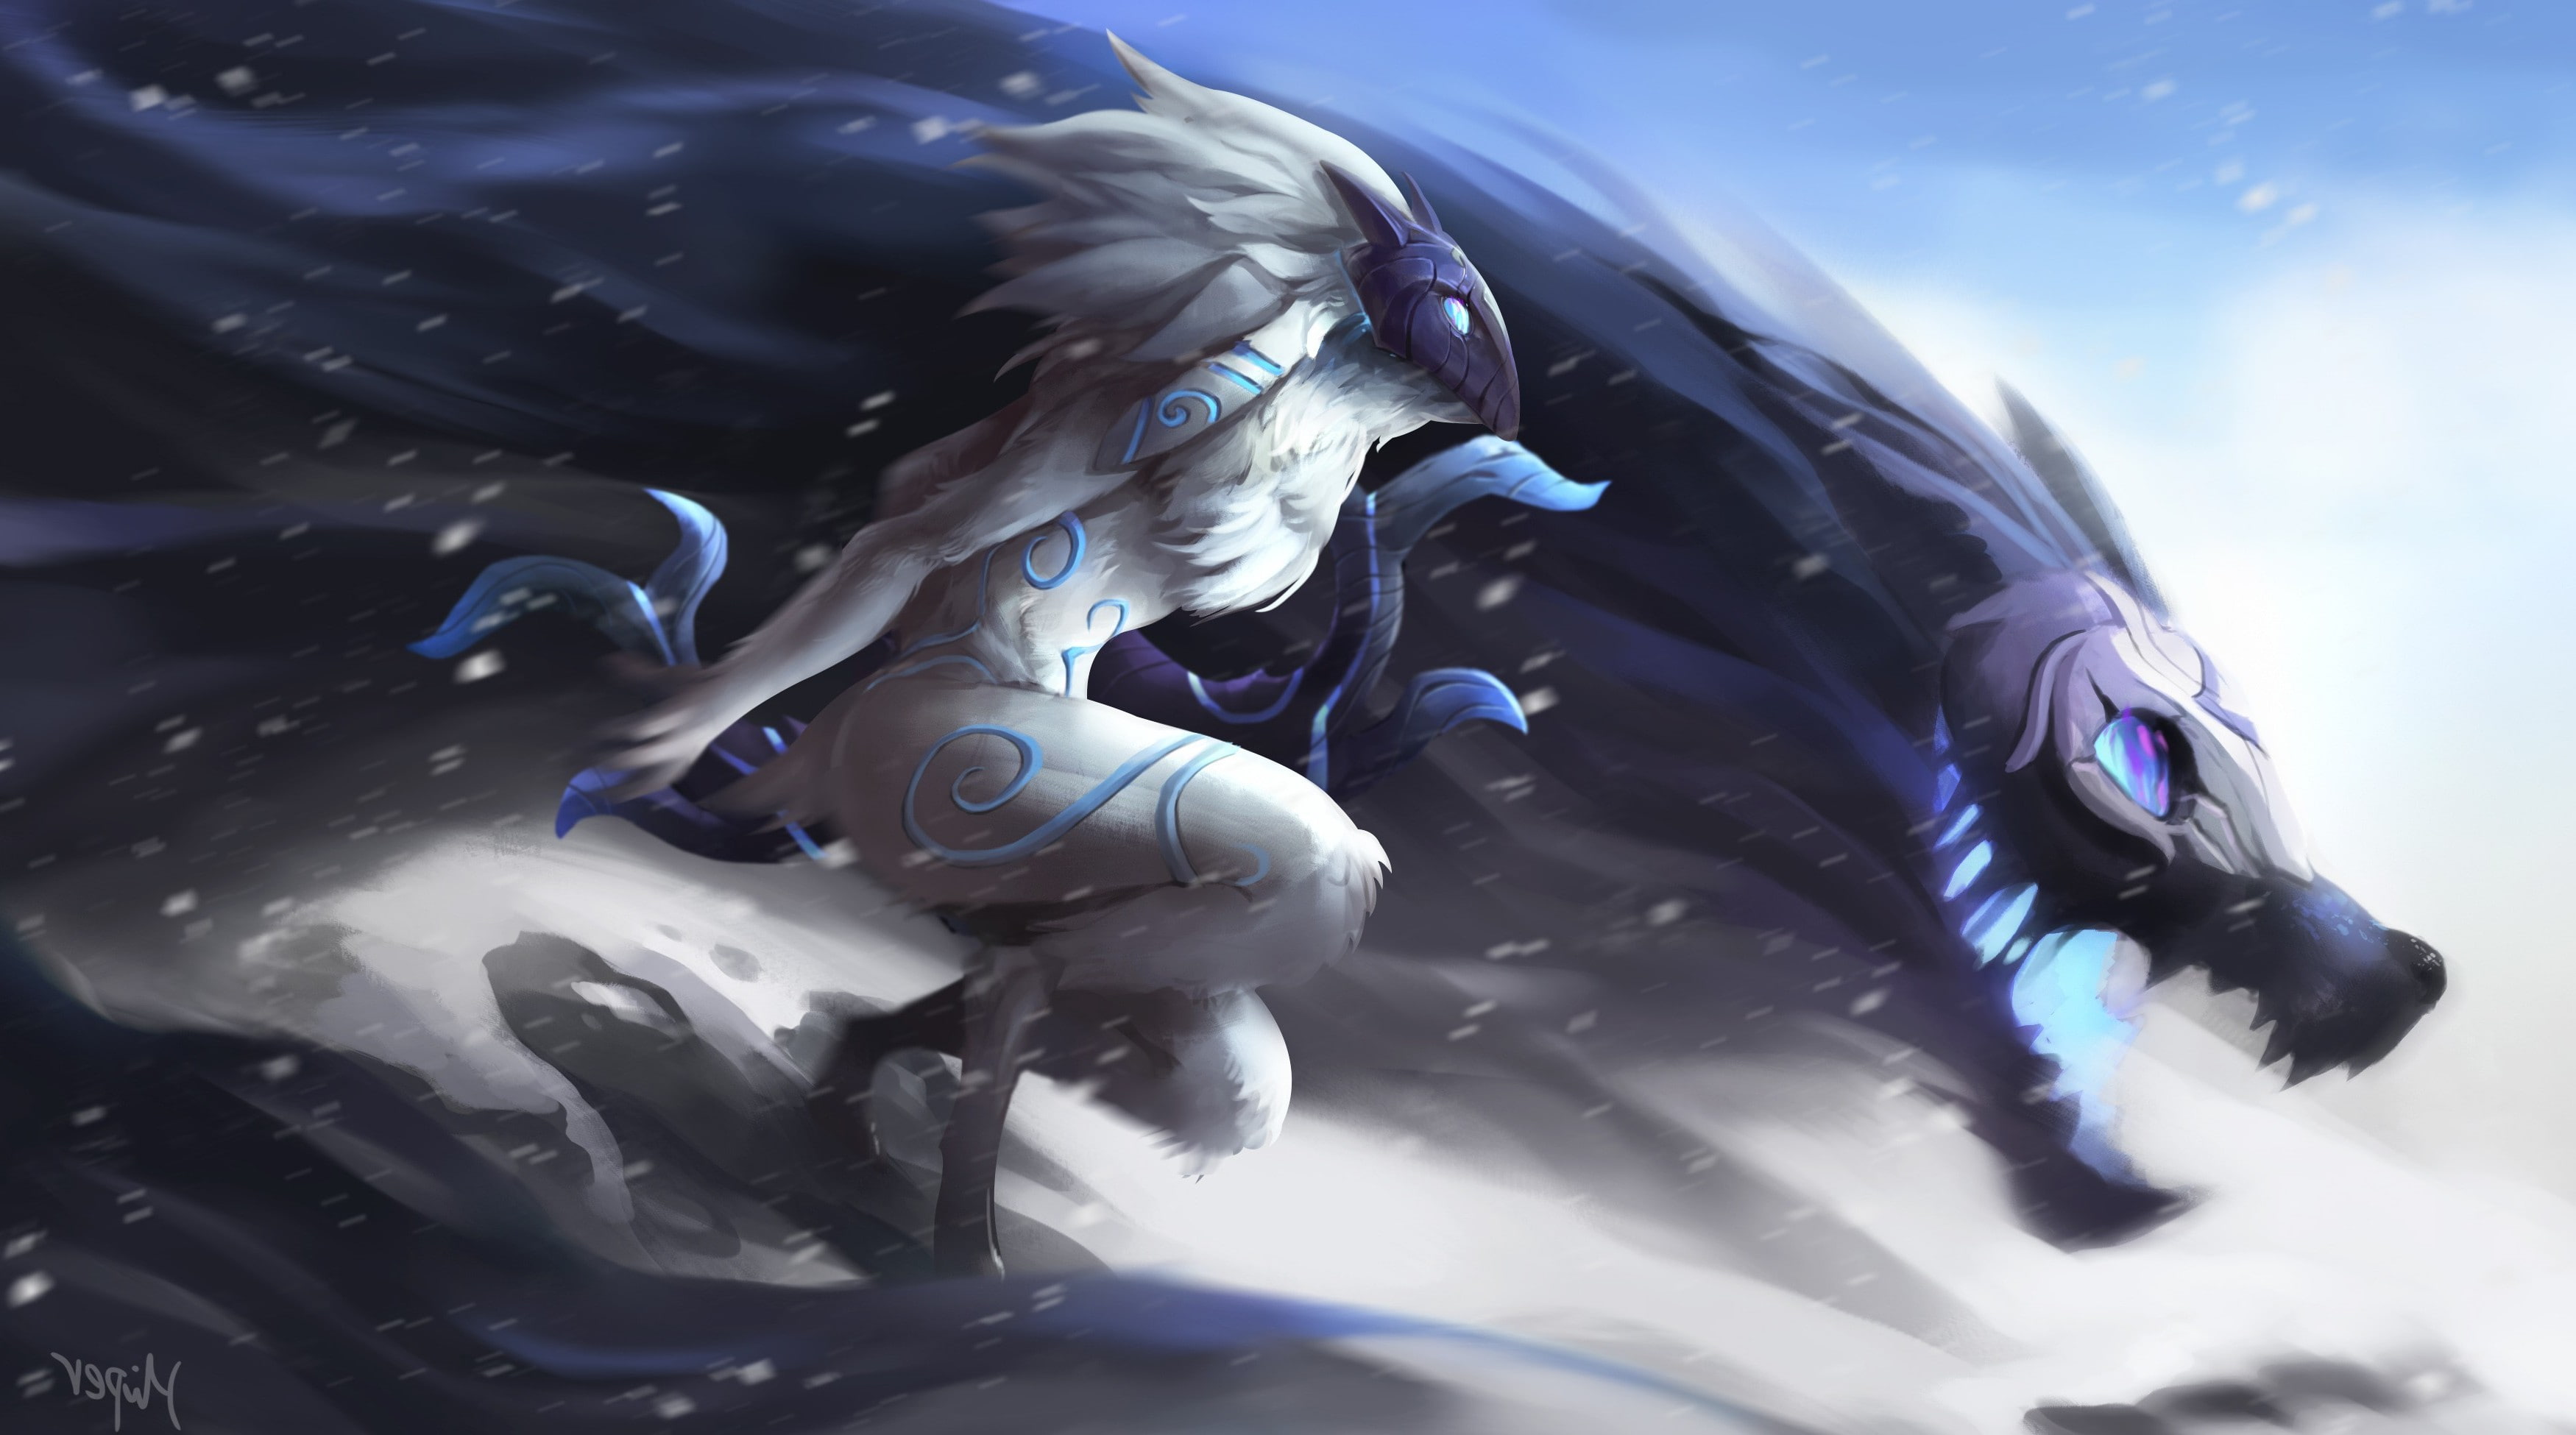 Kindred, League Of Legends, no people, art and craft, nature